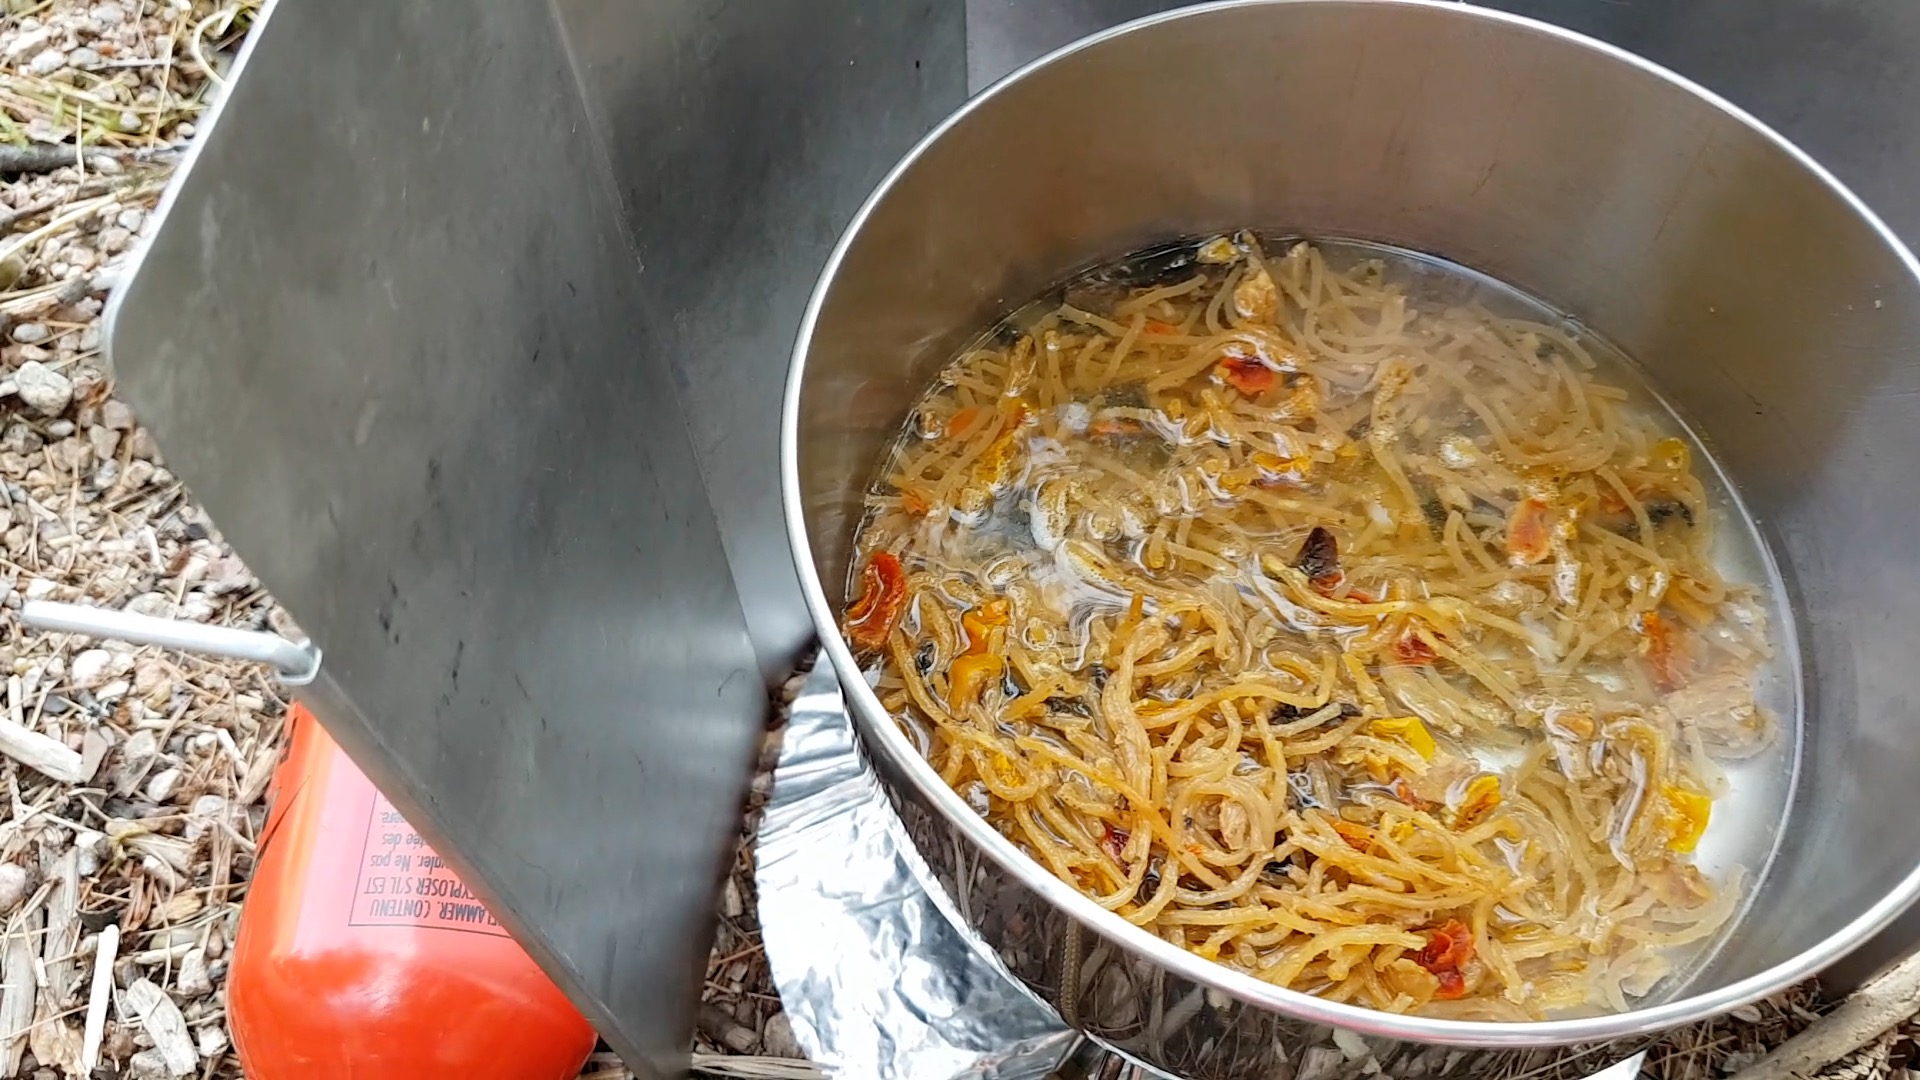 cook1 Cooking Dehydrated Rustic Spaghetti At Bon Echo Provincial Park - Watch The Video!